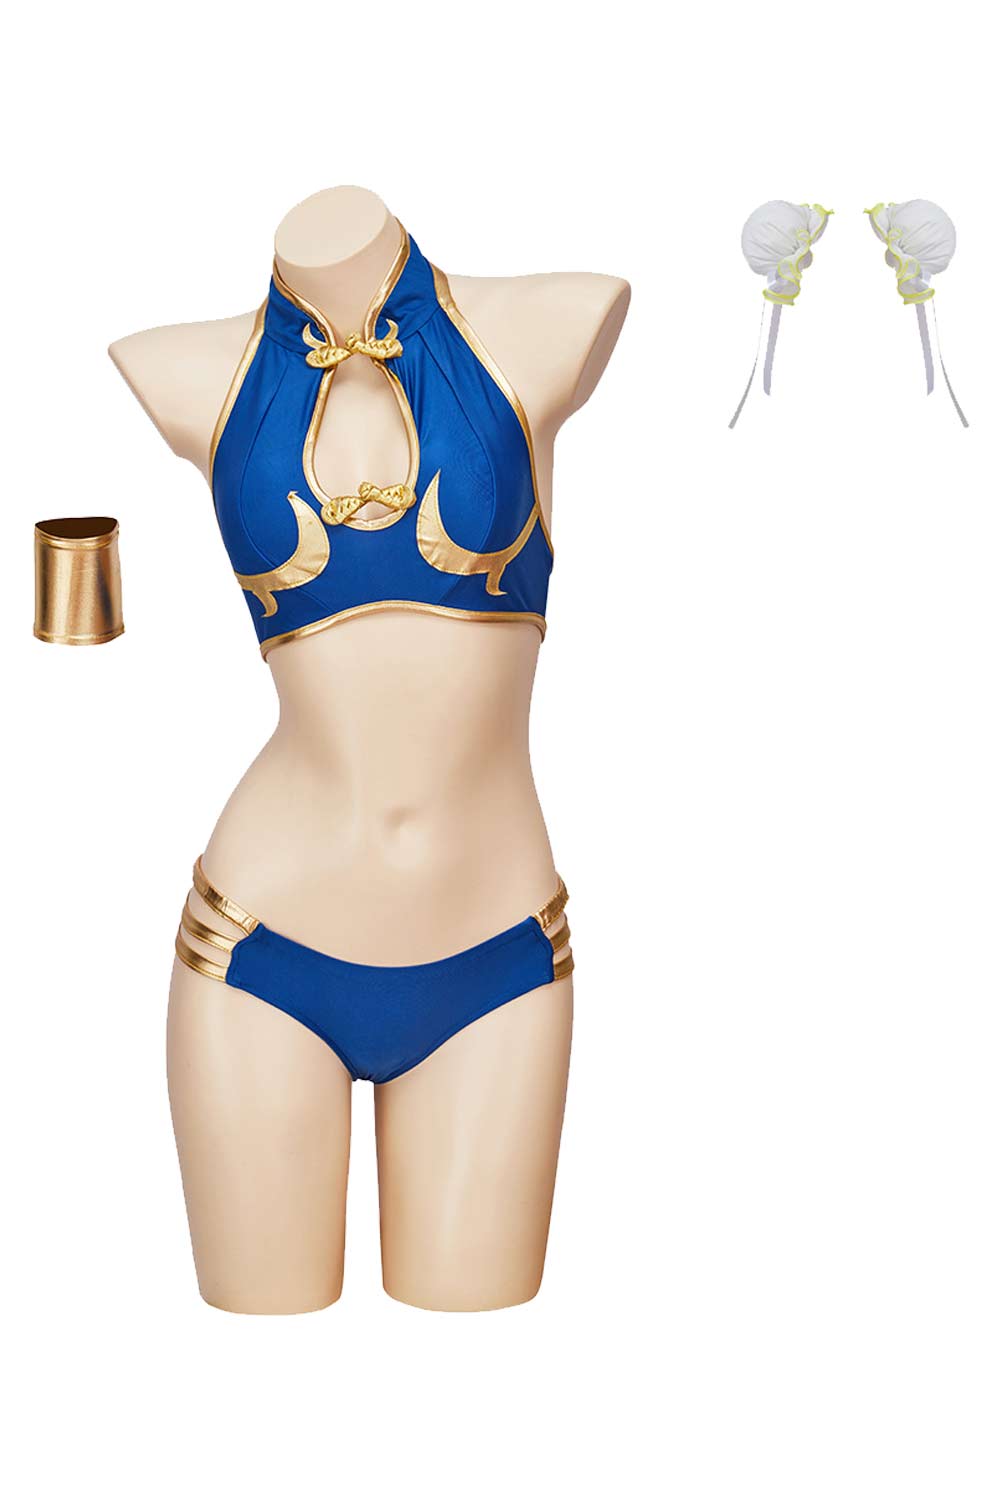 Game Street Fighter ChunLi 2 Piece Set Bikini Swimsuit Outfits Halloween Carnival Suit Cosplay Costume